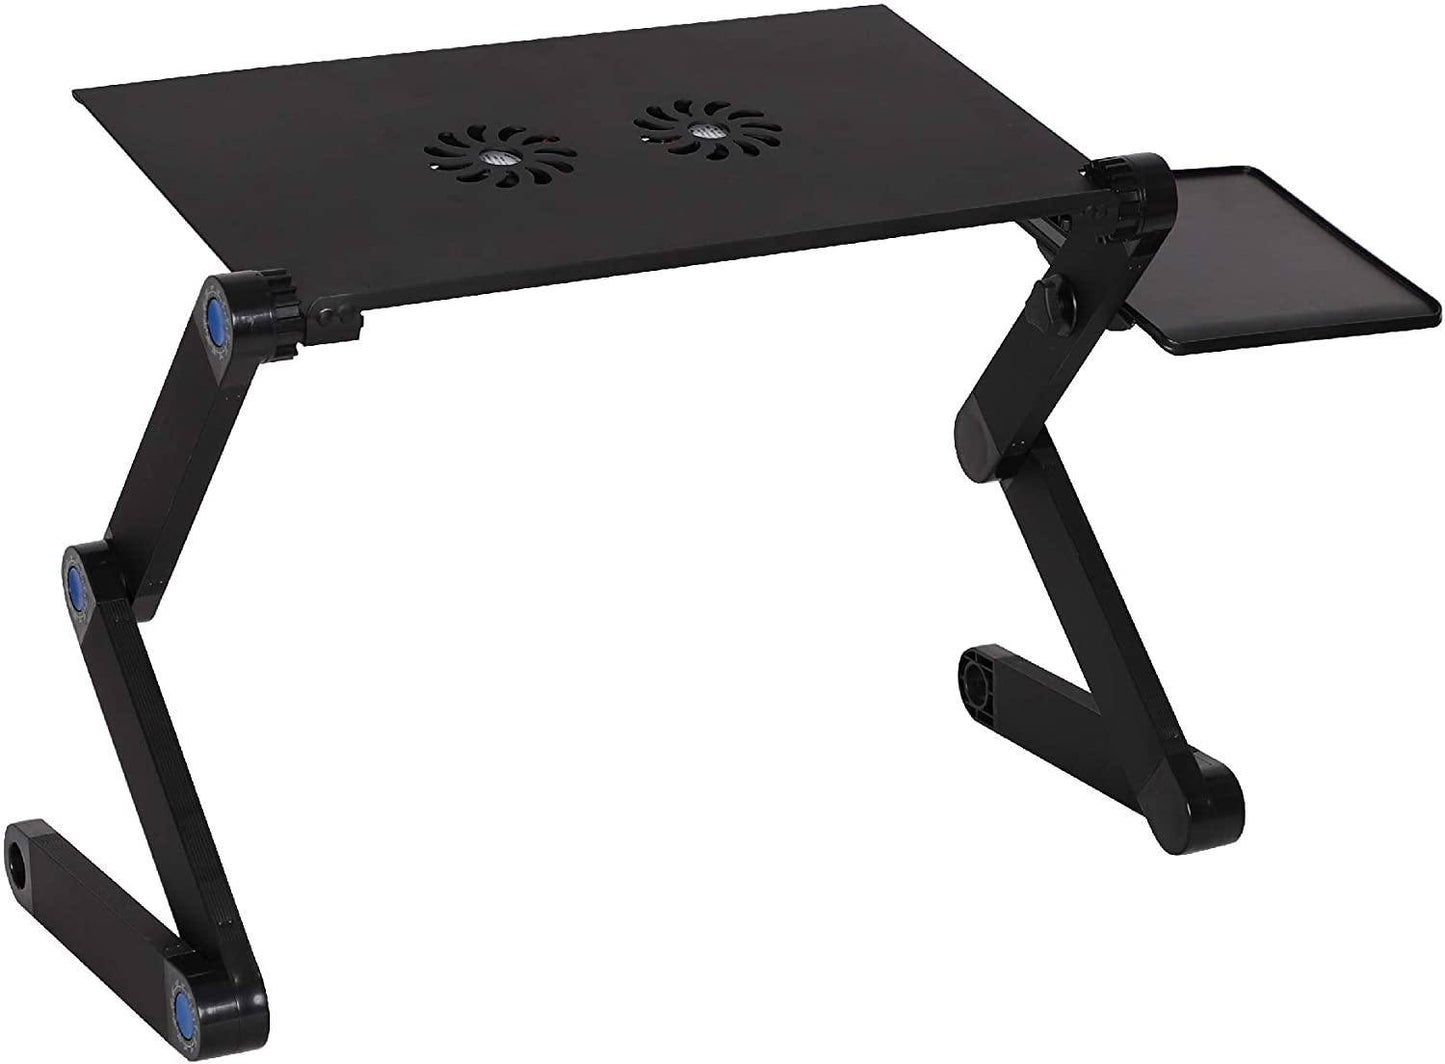 Foldable Aluminum Laptop Desk Adjustable Portable Table Stand with 2 CPU Cooling Fans and Mouse Pad